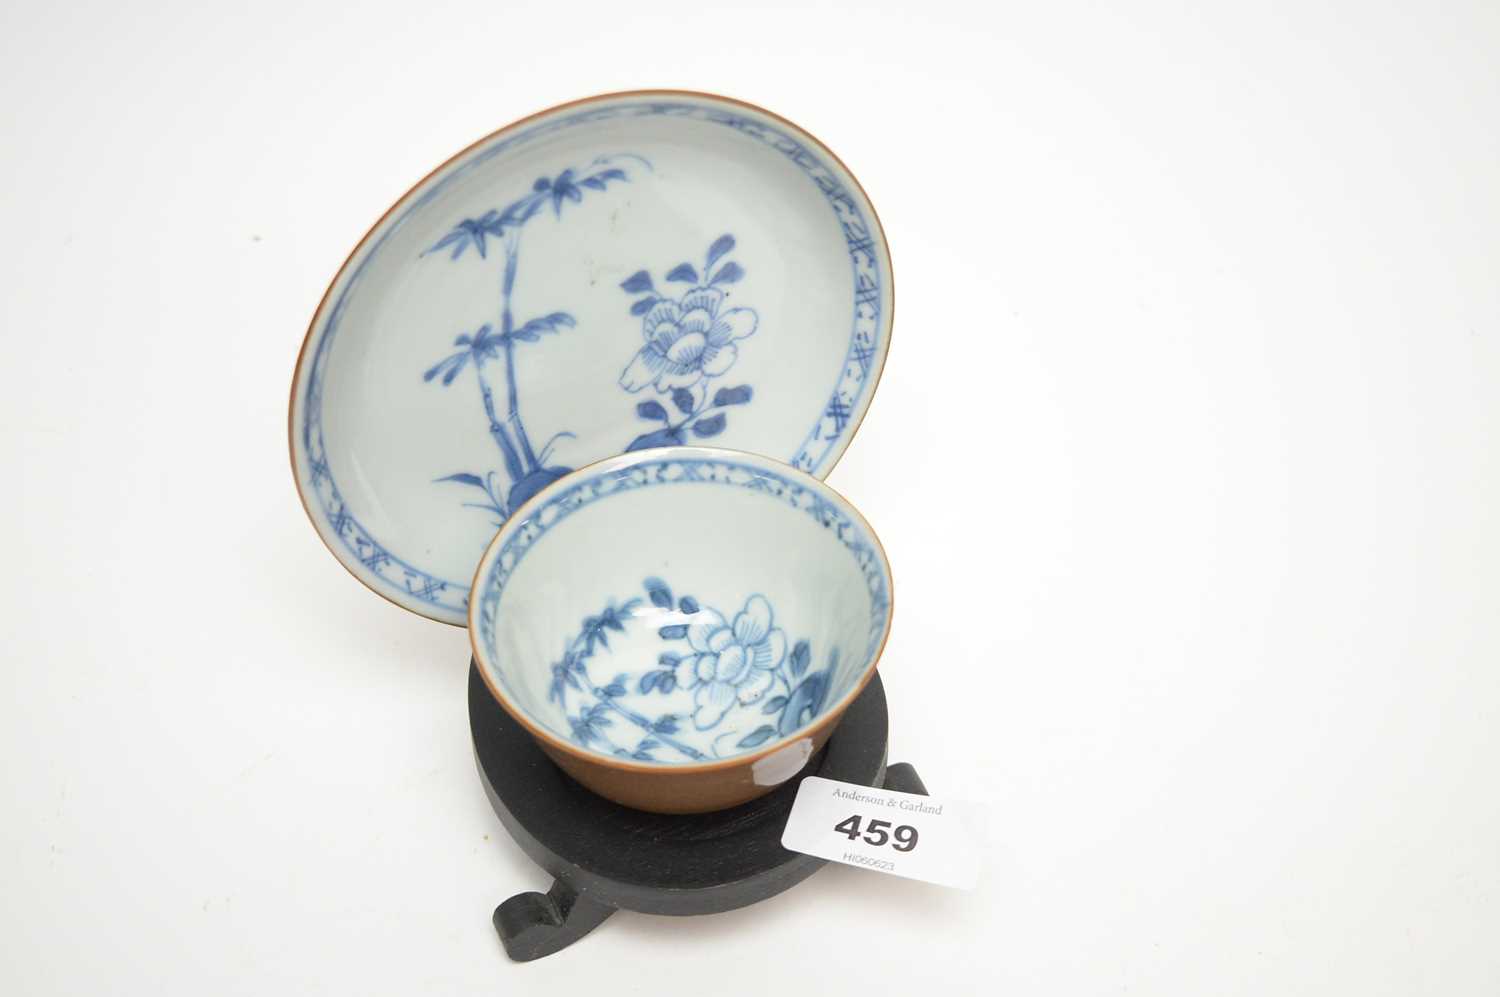 A Nanking Cargo Batavian Ware cafe-au-lait-ground blue and white tea bowl and saucer - Image 2 of 5